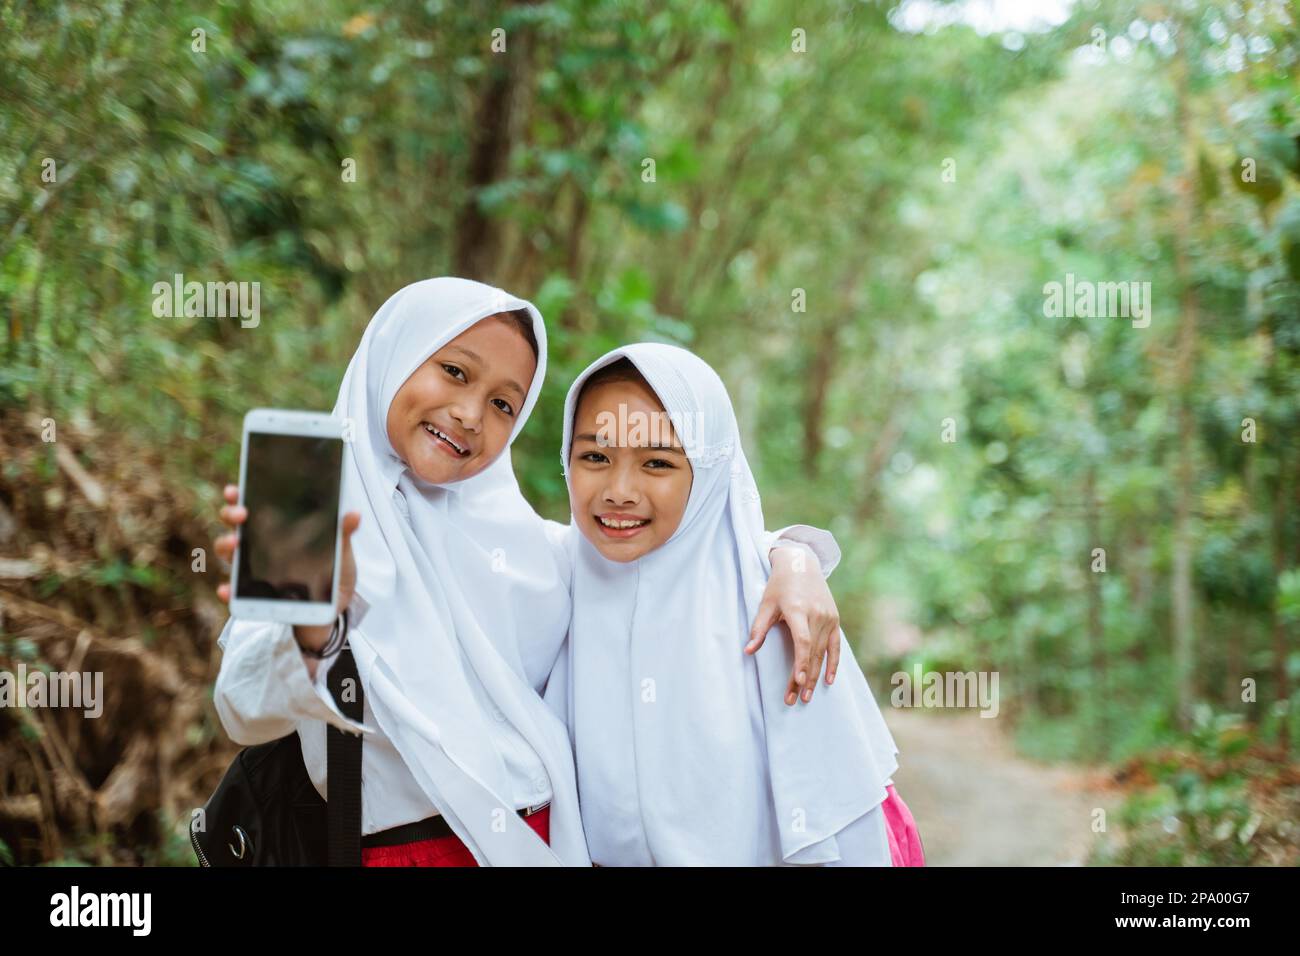 two female elementary students standing together showing the phone to the camera Stock Photo